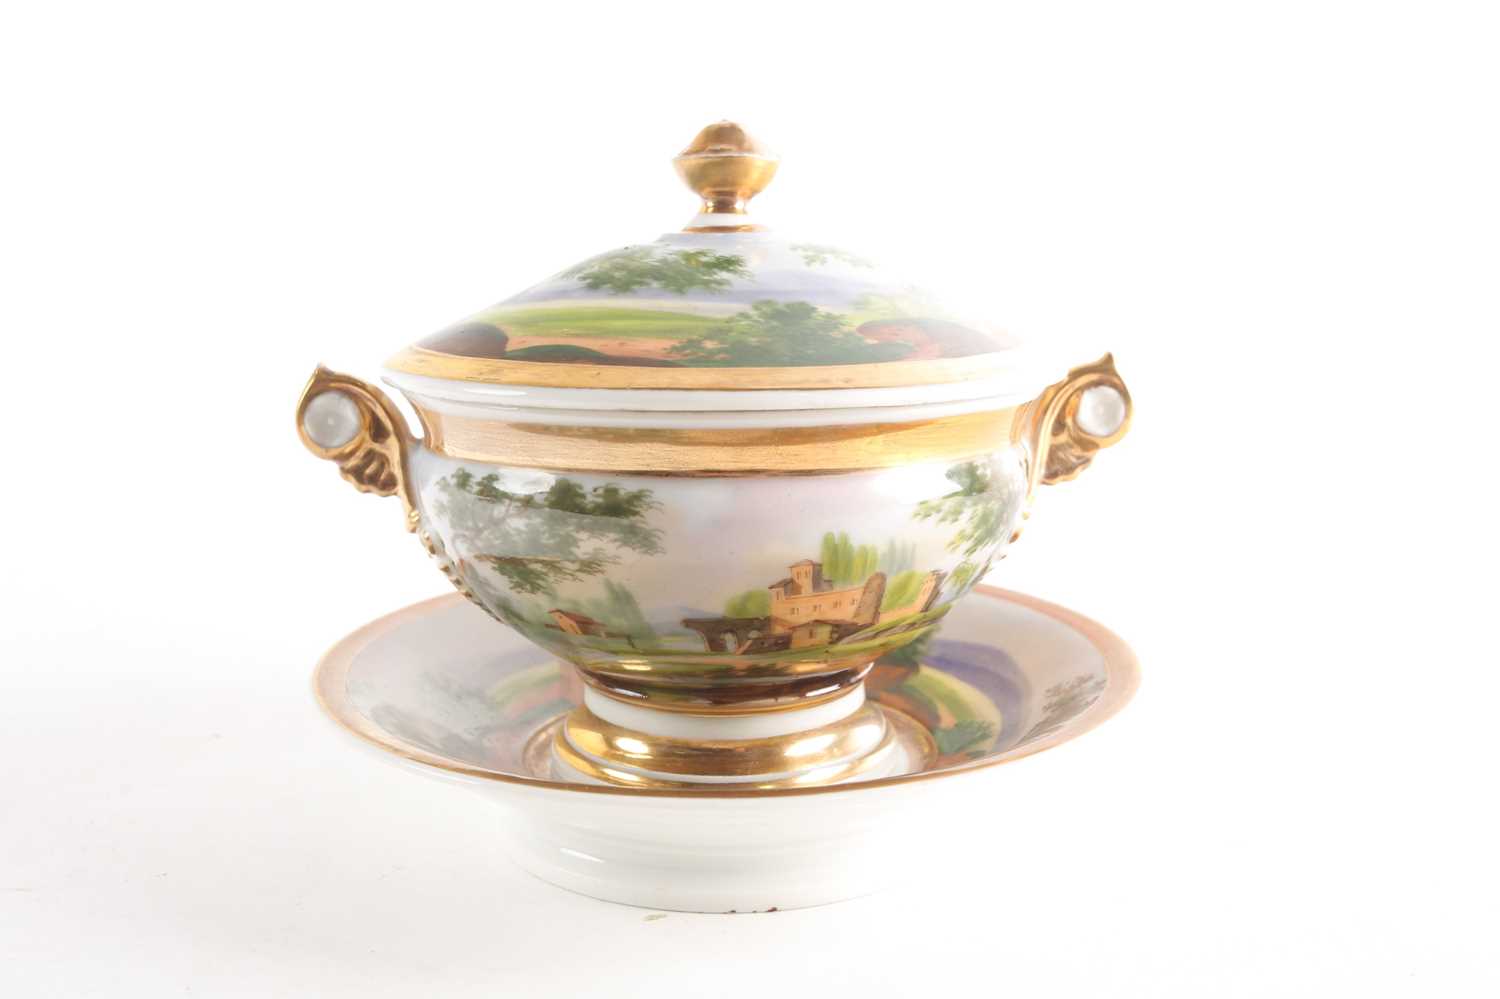 A 19th century tureen and cover, unmarked but possibly Russian, with hand-painted landscape and gilt